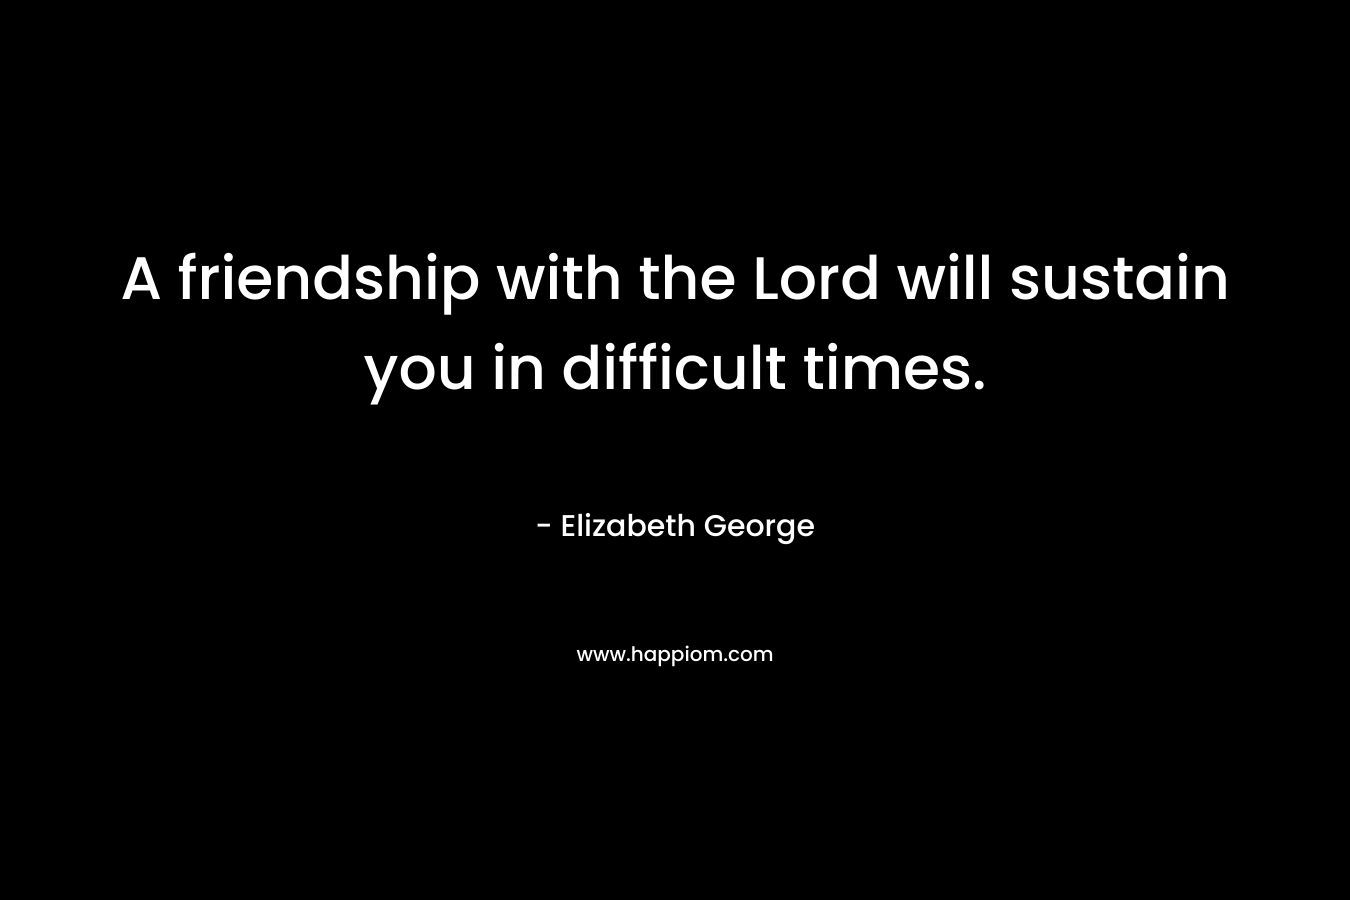 A friendship with the Lord will sustain you in difficult times.